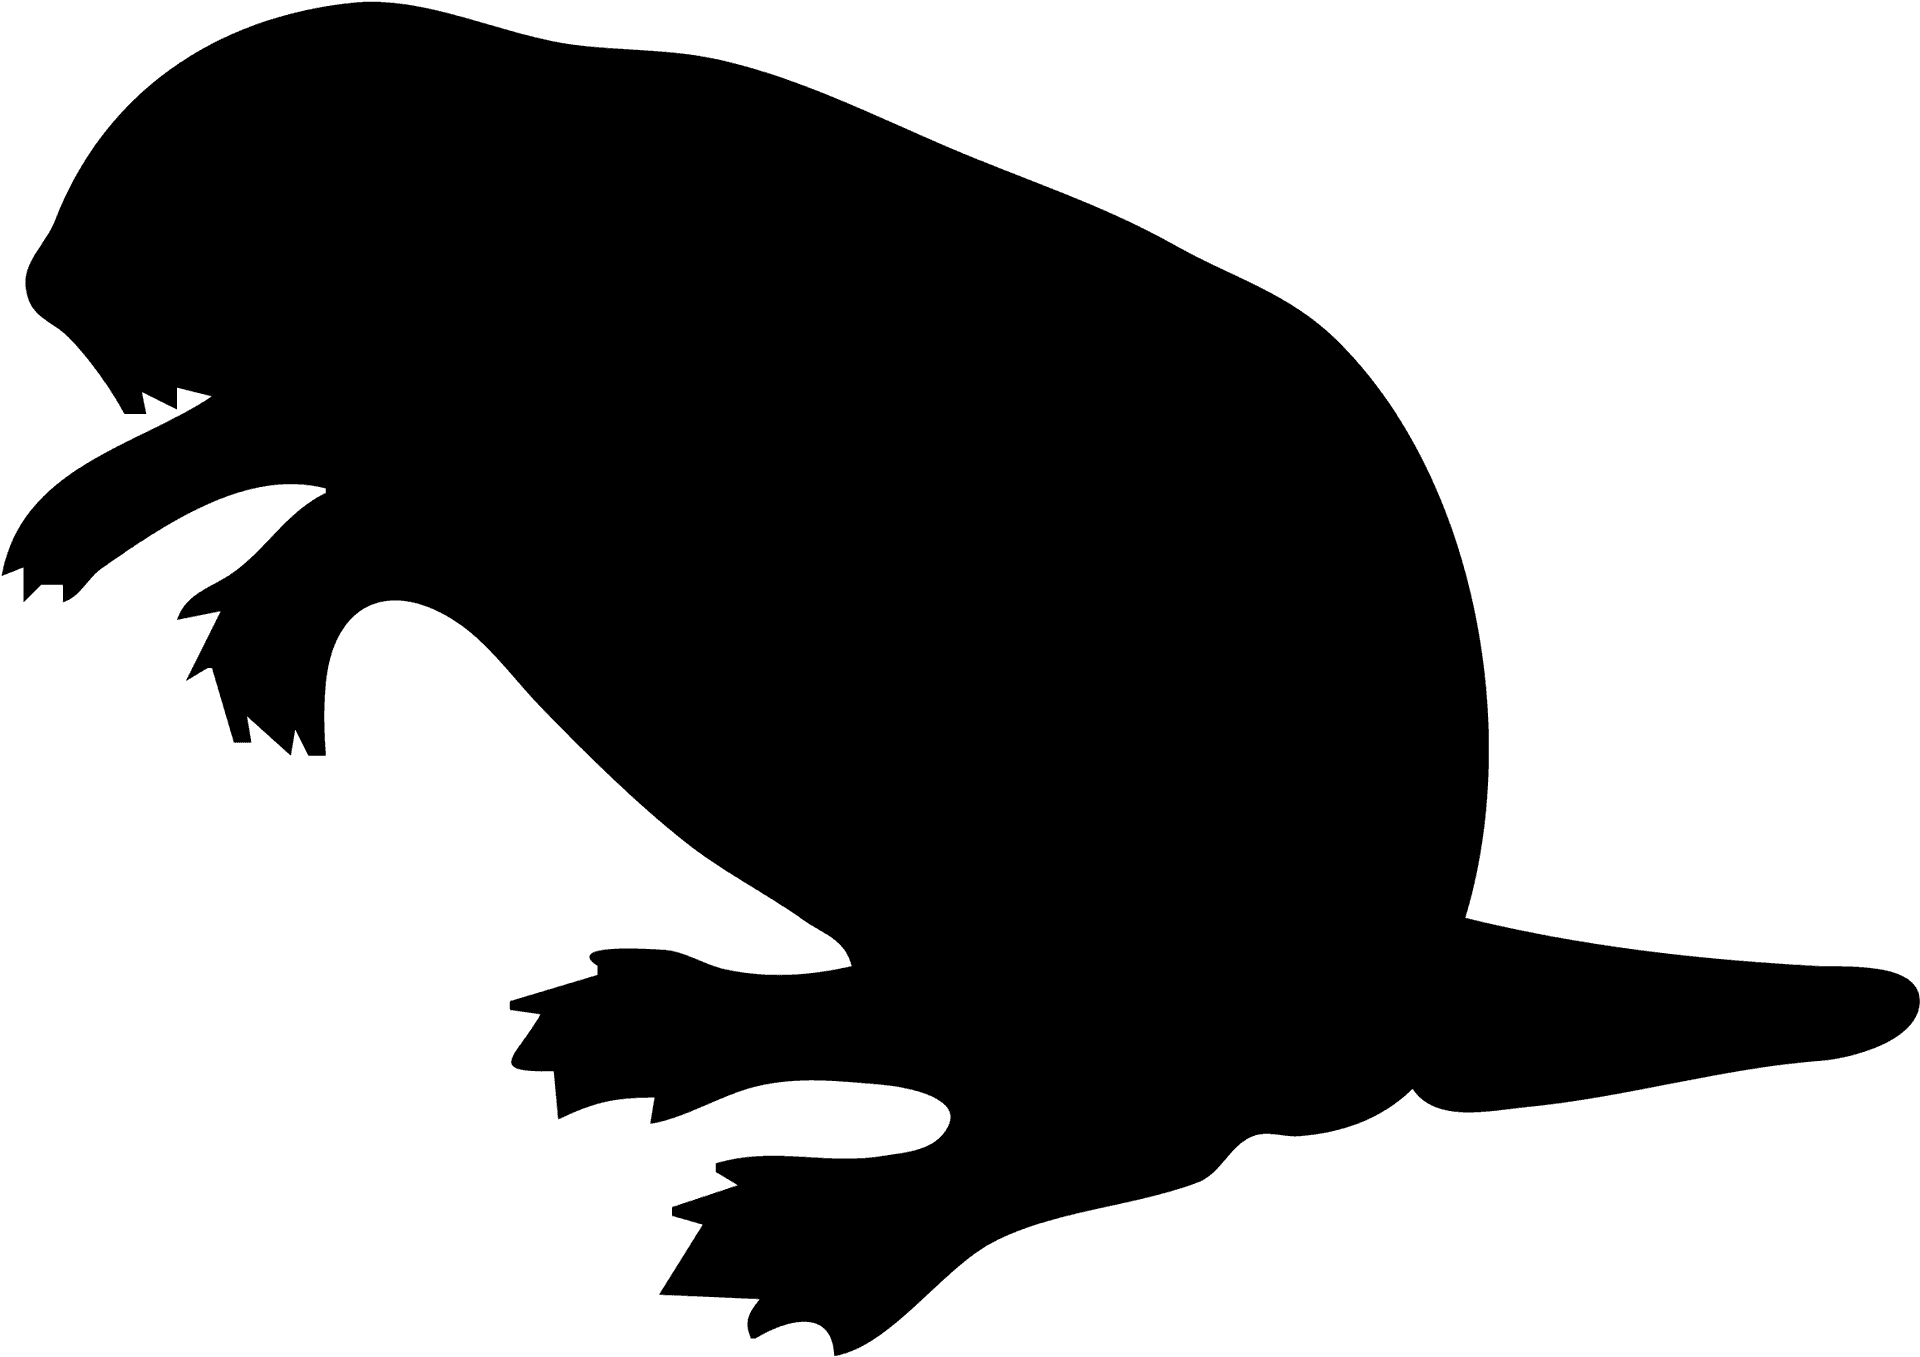 Beaver Silhouette Graphic PNG